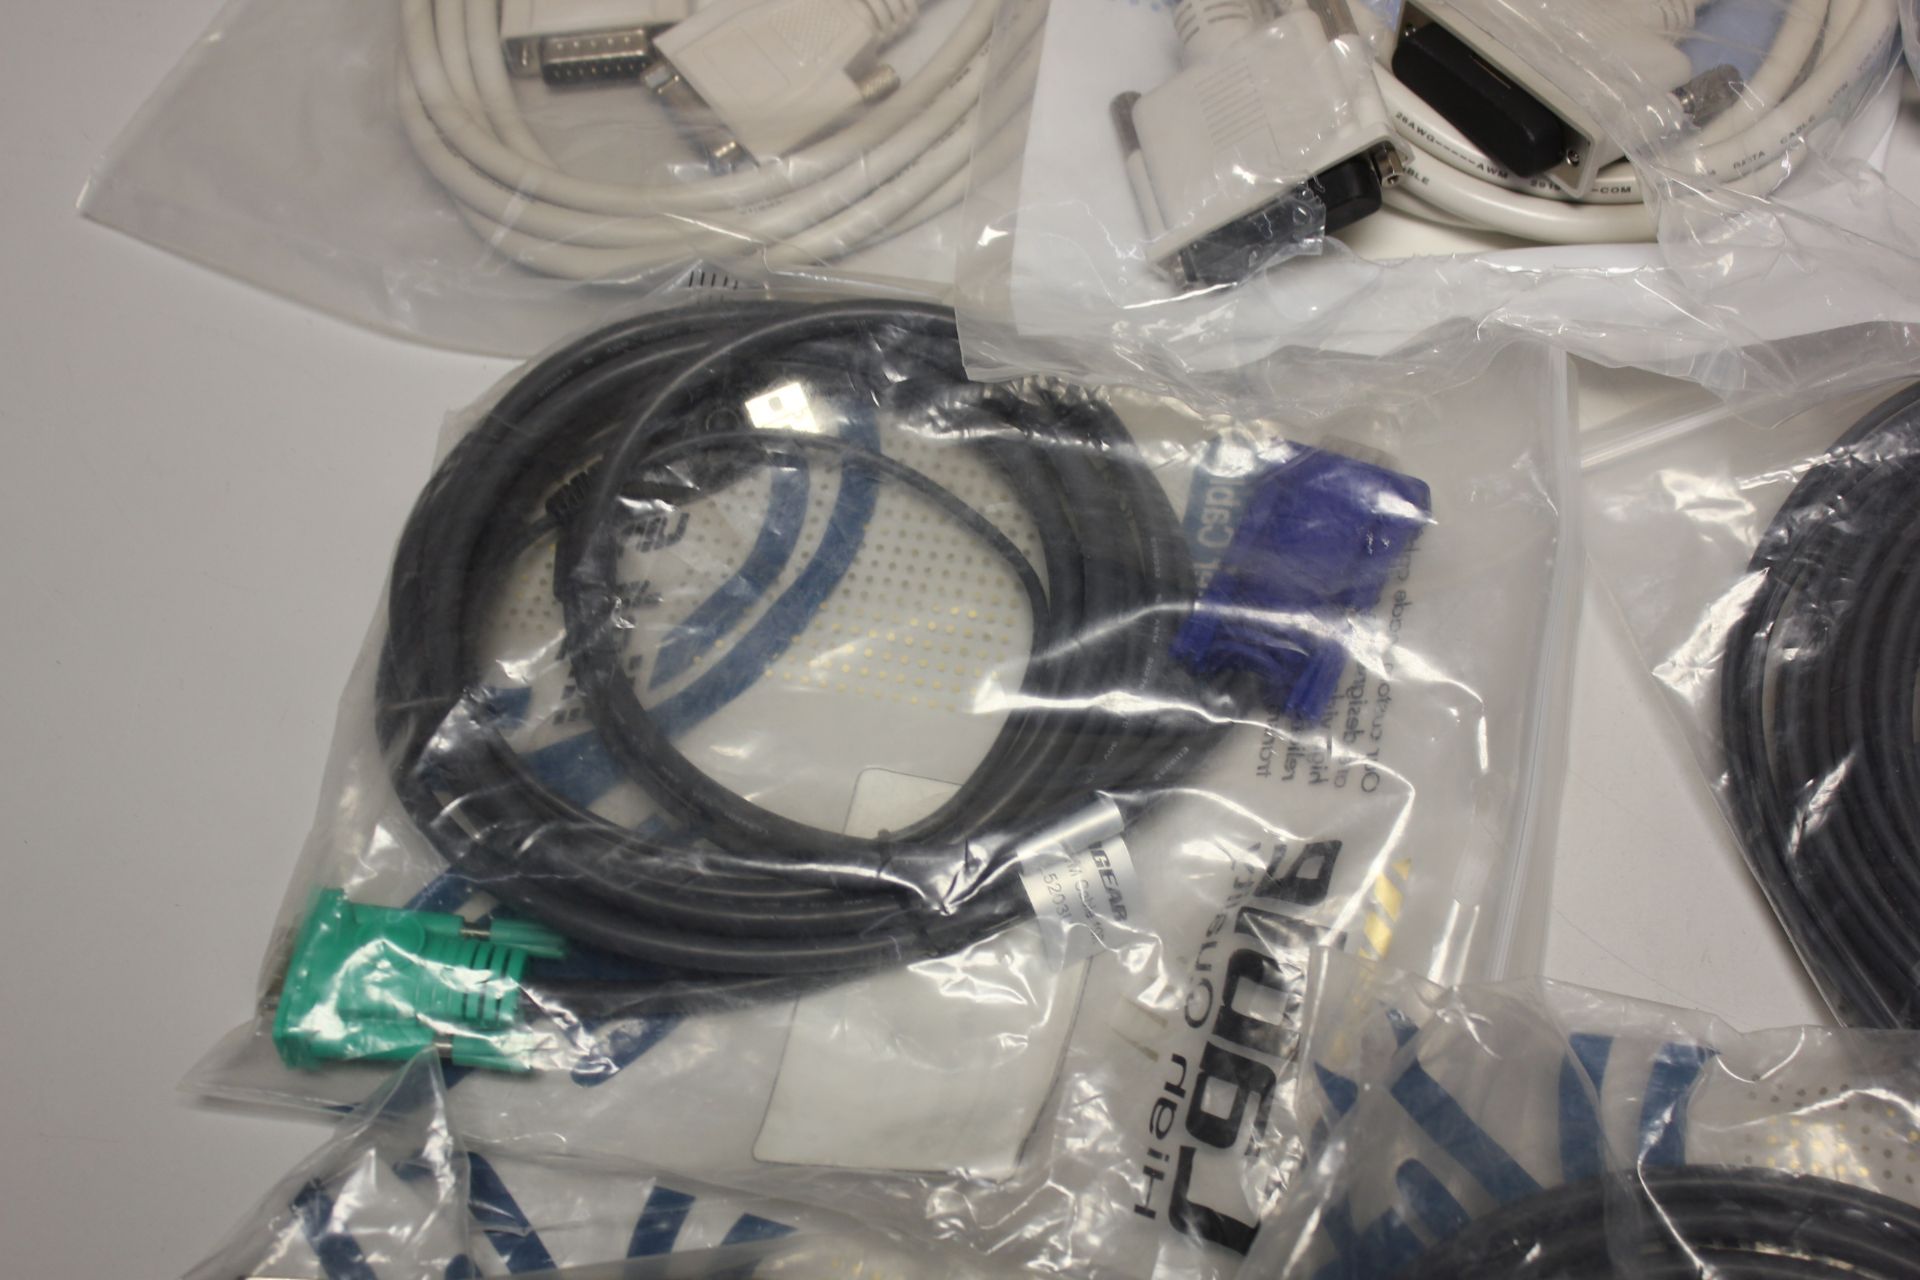 LOT OF NEW CABLES USB, KVM, PS2 - Image 8 of 11